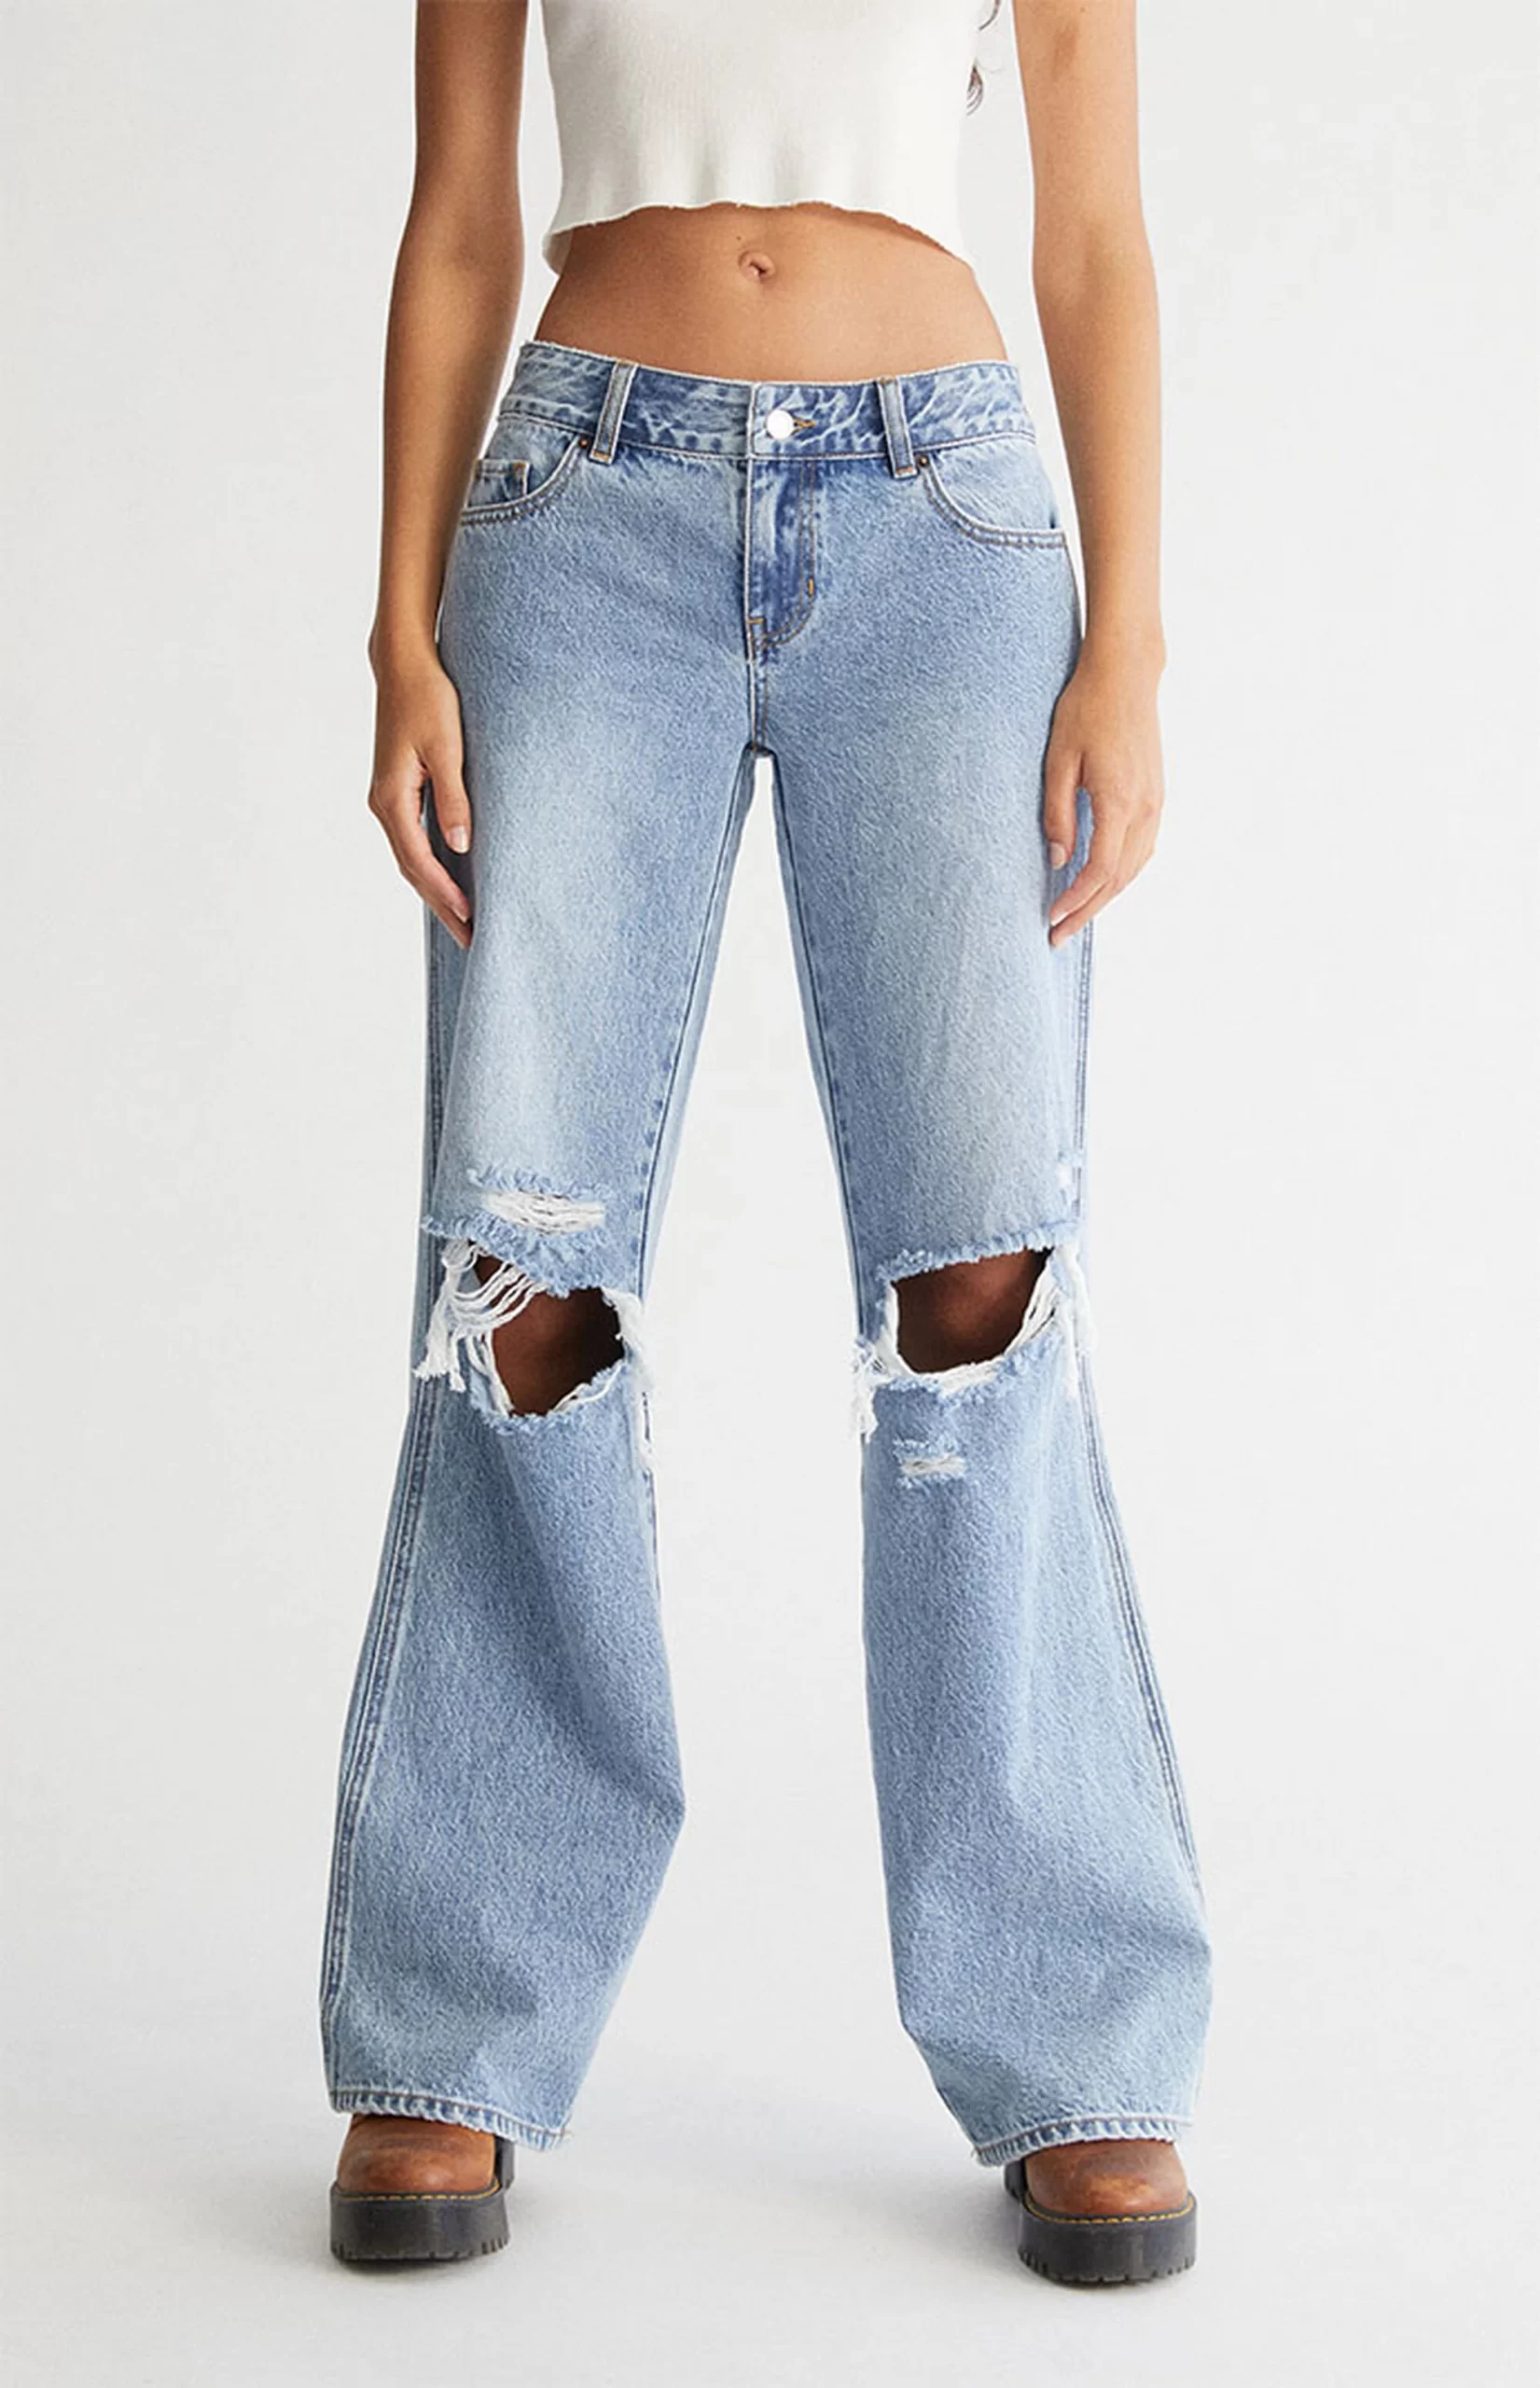 PacSun Light Blue Ripped Low Rise Baggy Jeans